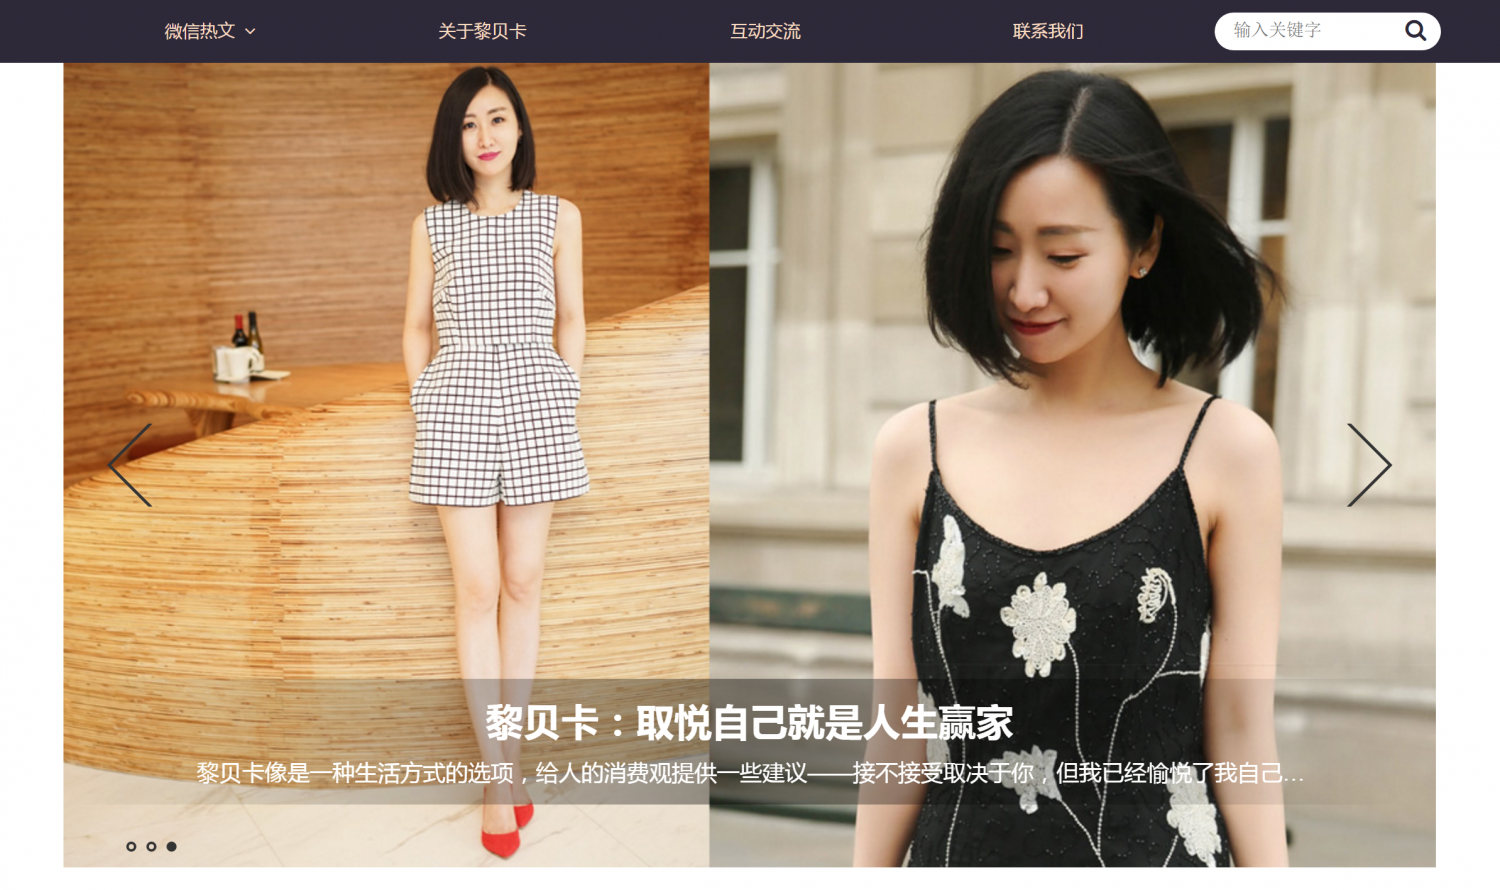 Li Beika was ranked number four among top Chinese fashion bloggers by Exane BNP Paribas based on her number of Weibo followers. 